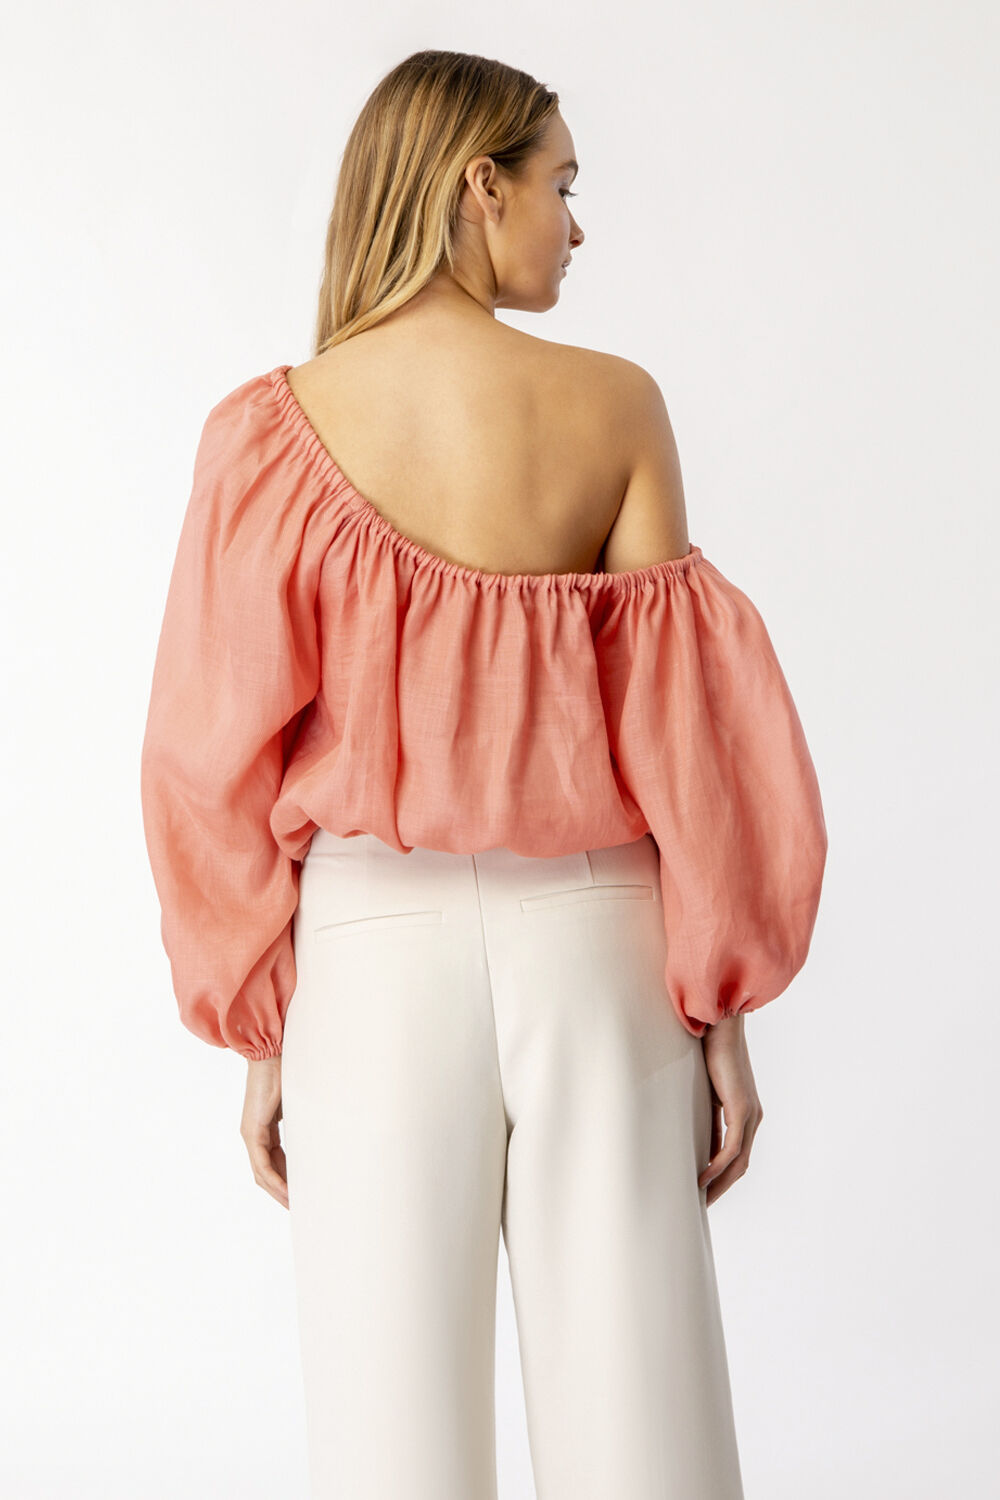 GIANNA ONE SHOULDER TOP in colour CORAL CLOUD